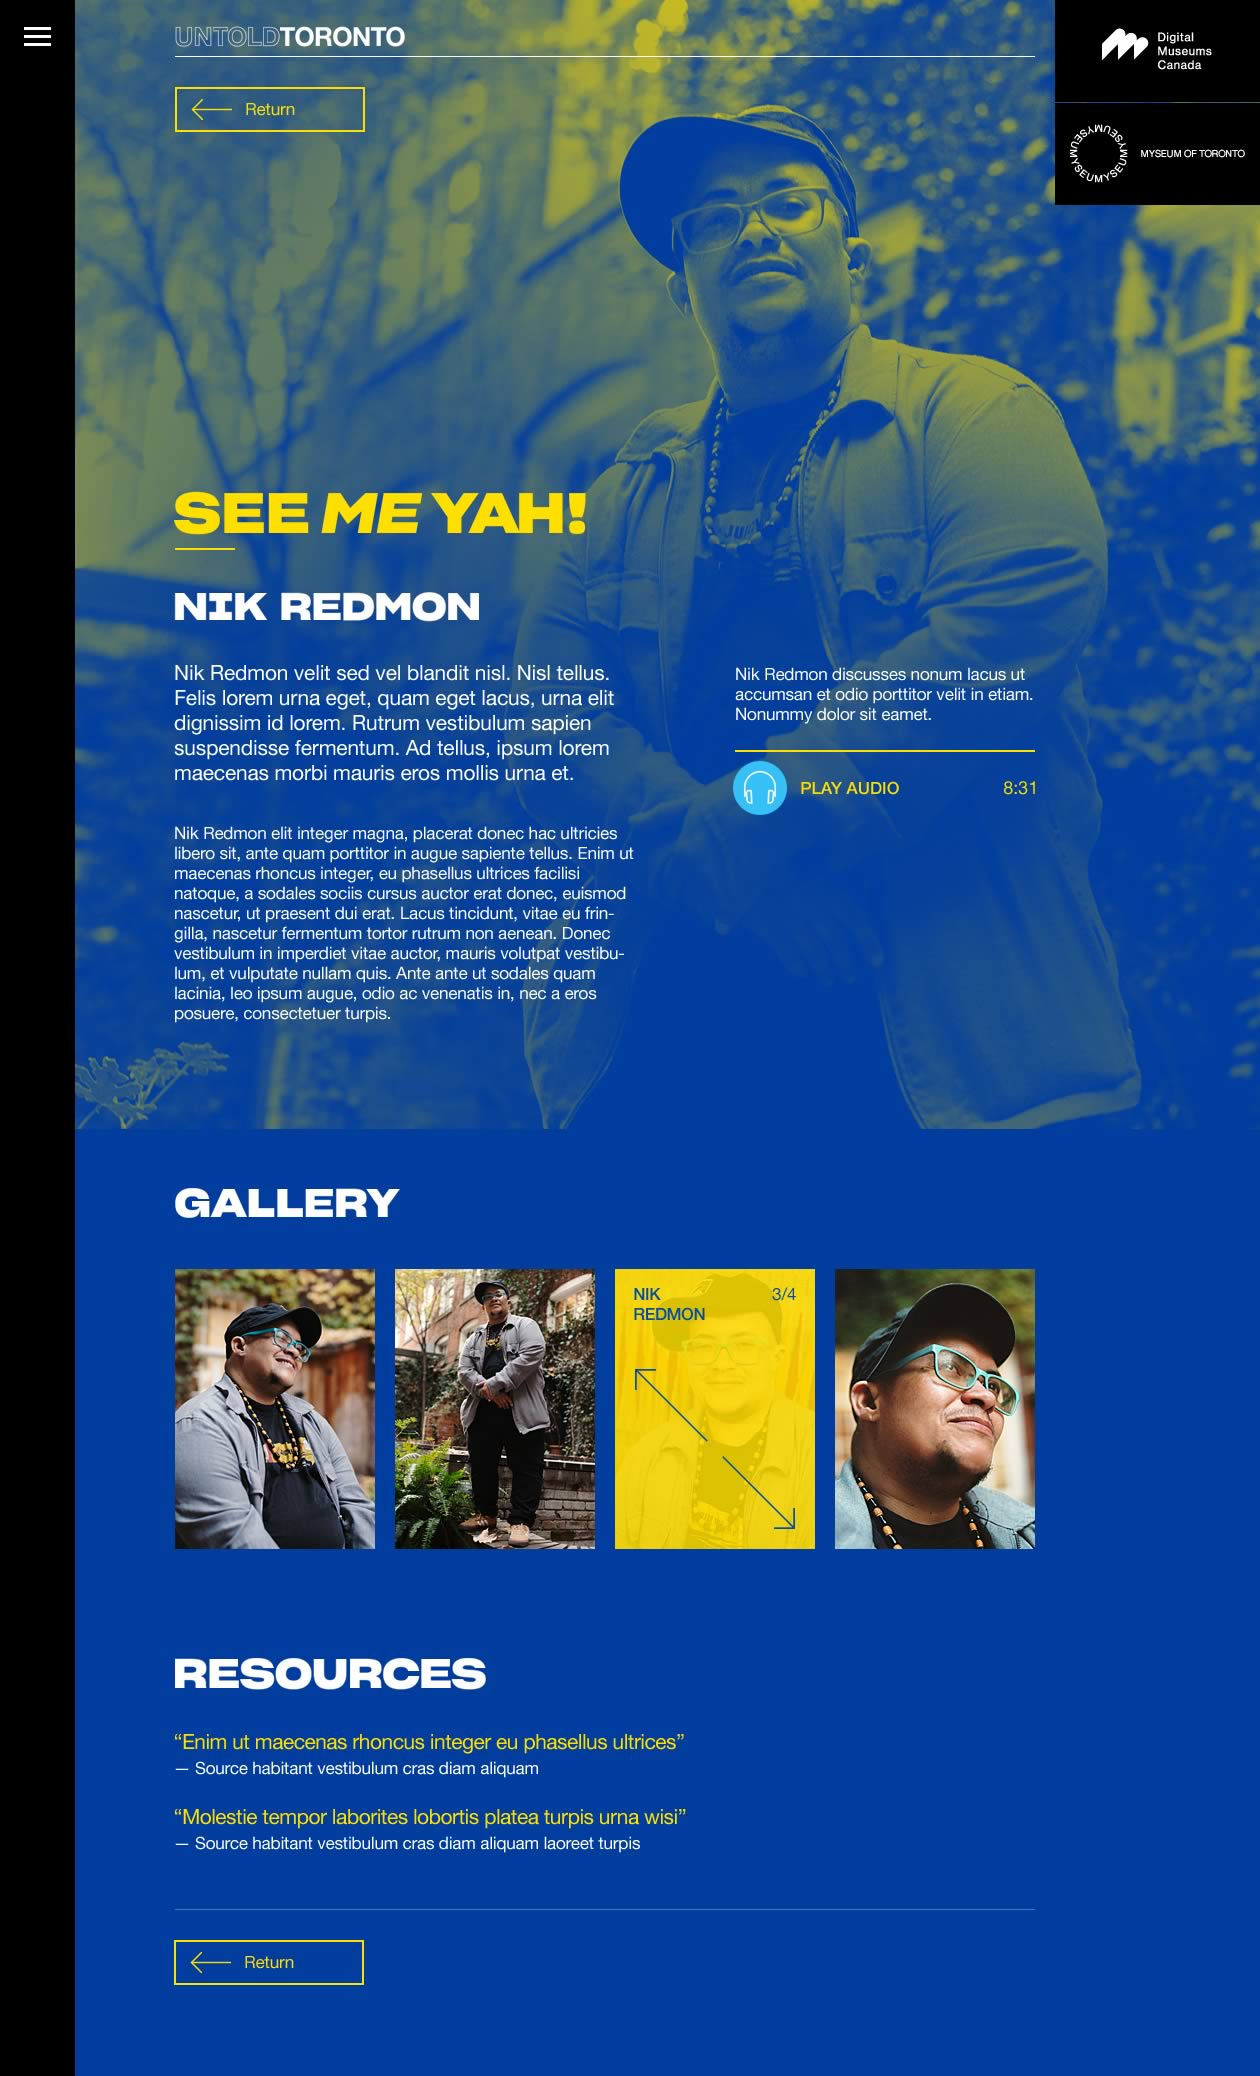 Capture of the full 'See Me Yah!' subpage from the Untold Toronto microsite